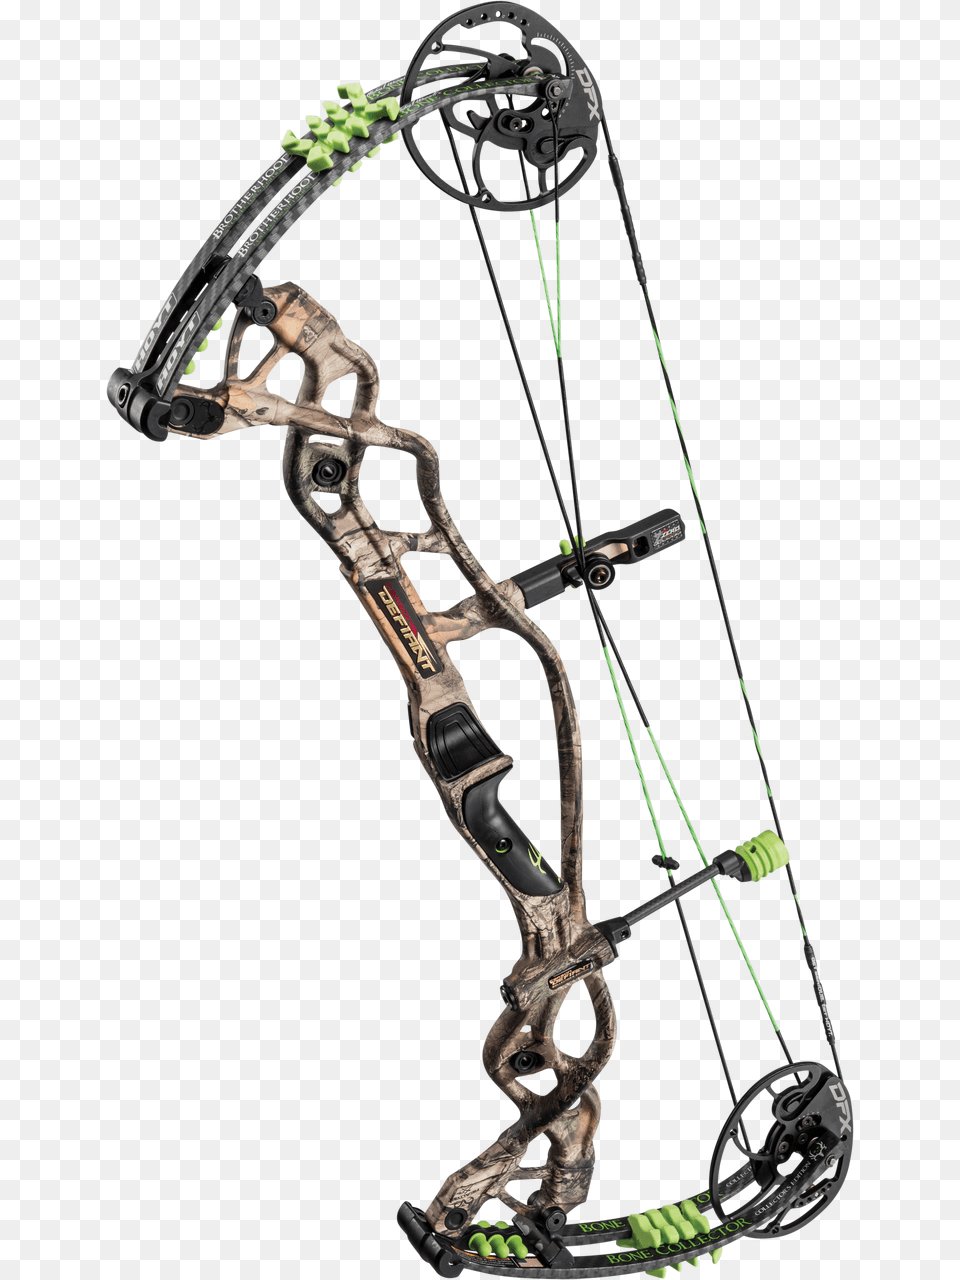 Image Hoyt Powermax Bone Collector Edition, Weapon, Bow Png